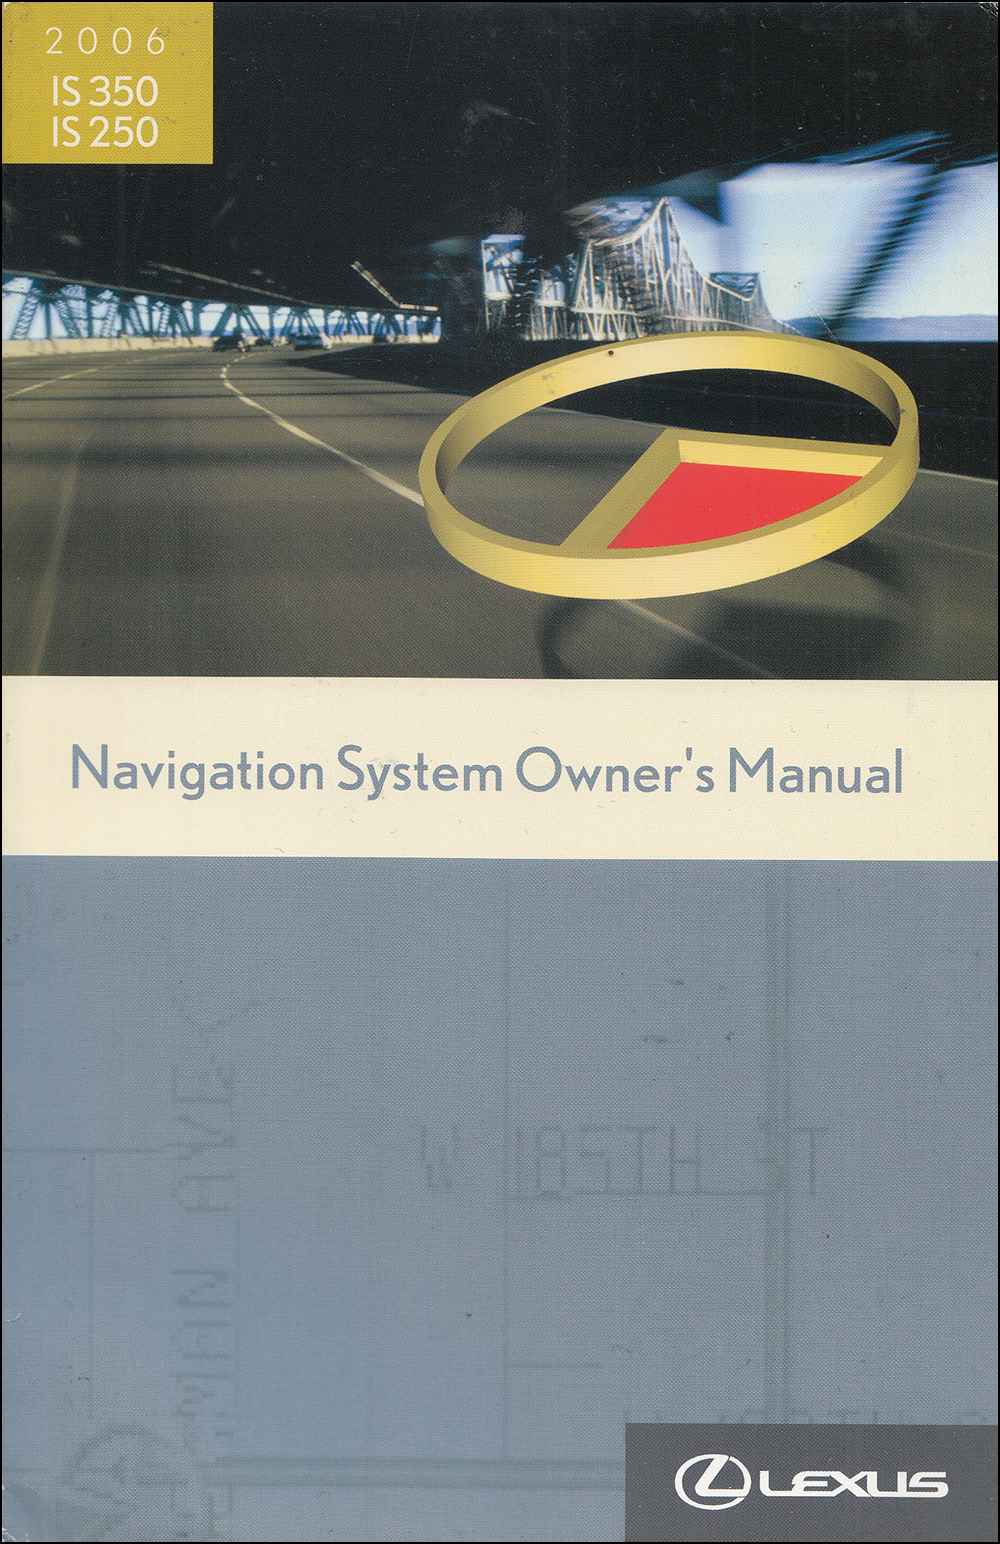 2006 Lexus IS 250 & IS 350 Navigation System Owners Manual Original